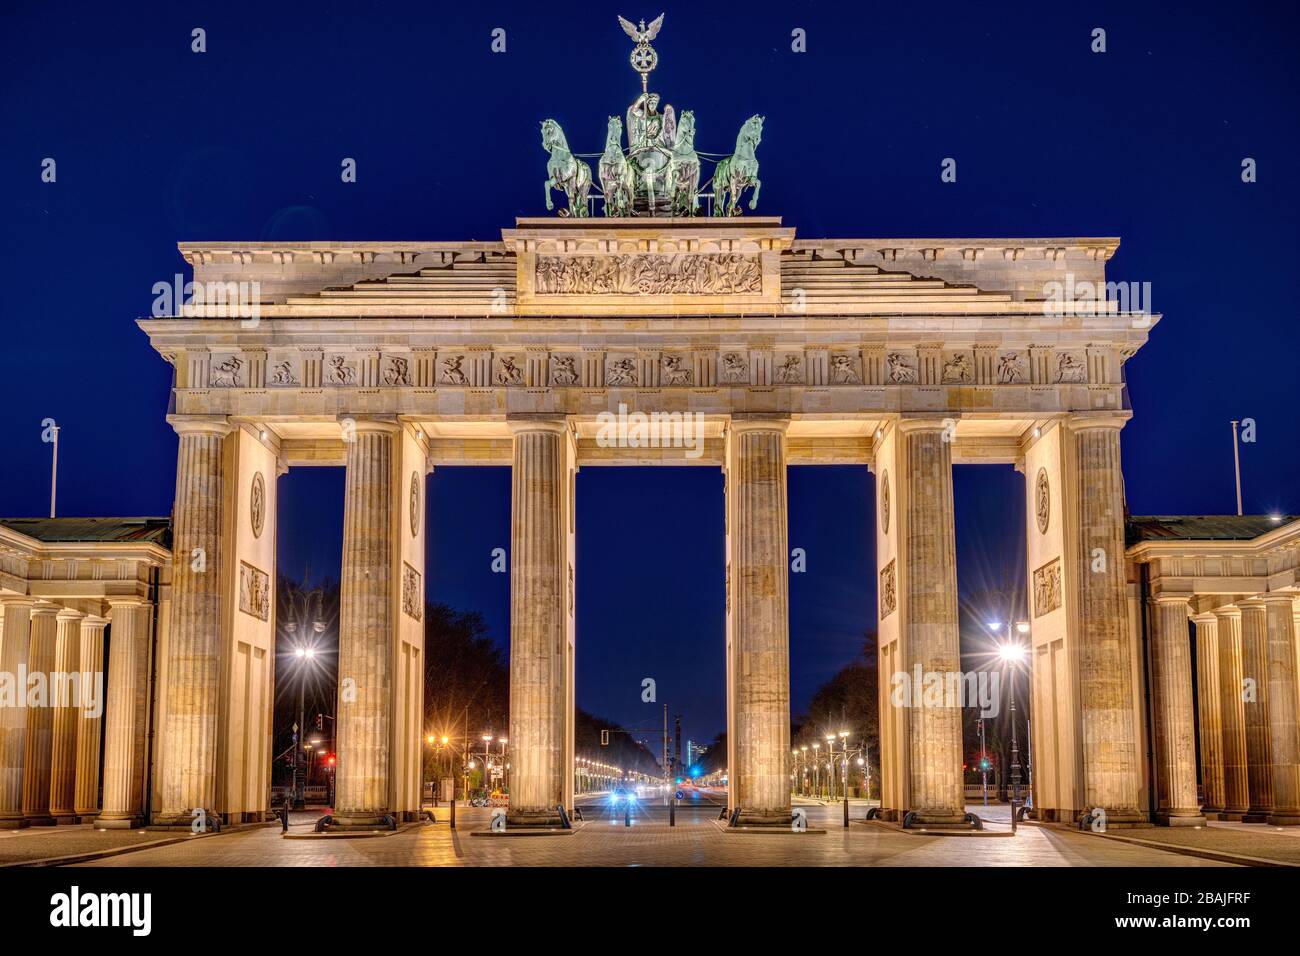 The illuminated Brandenburg Gate in Berlin at night with no people Stock Photo